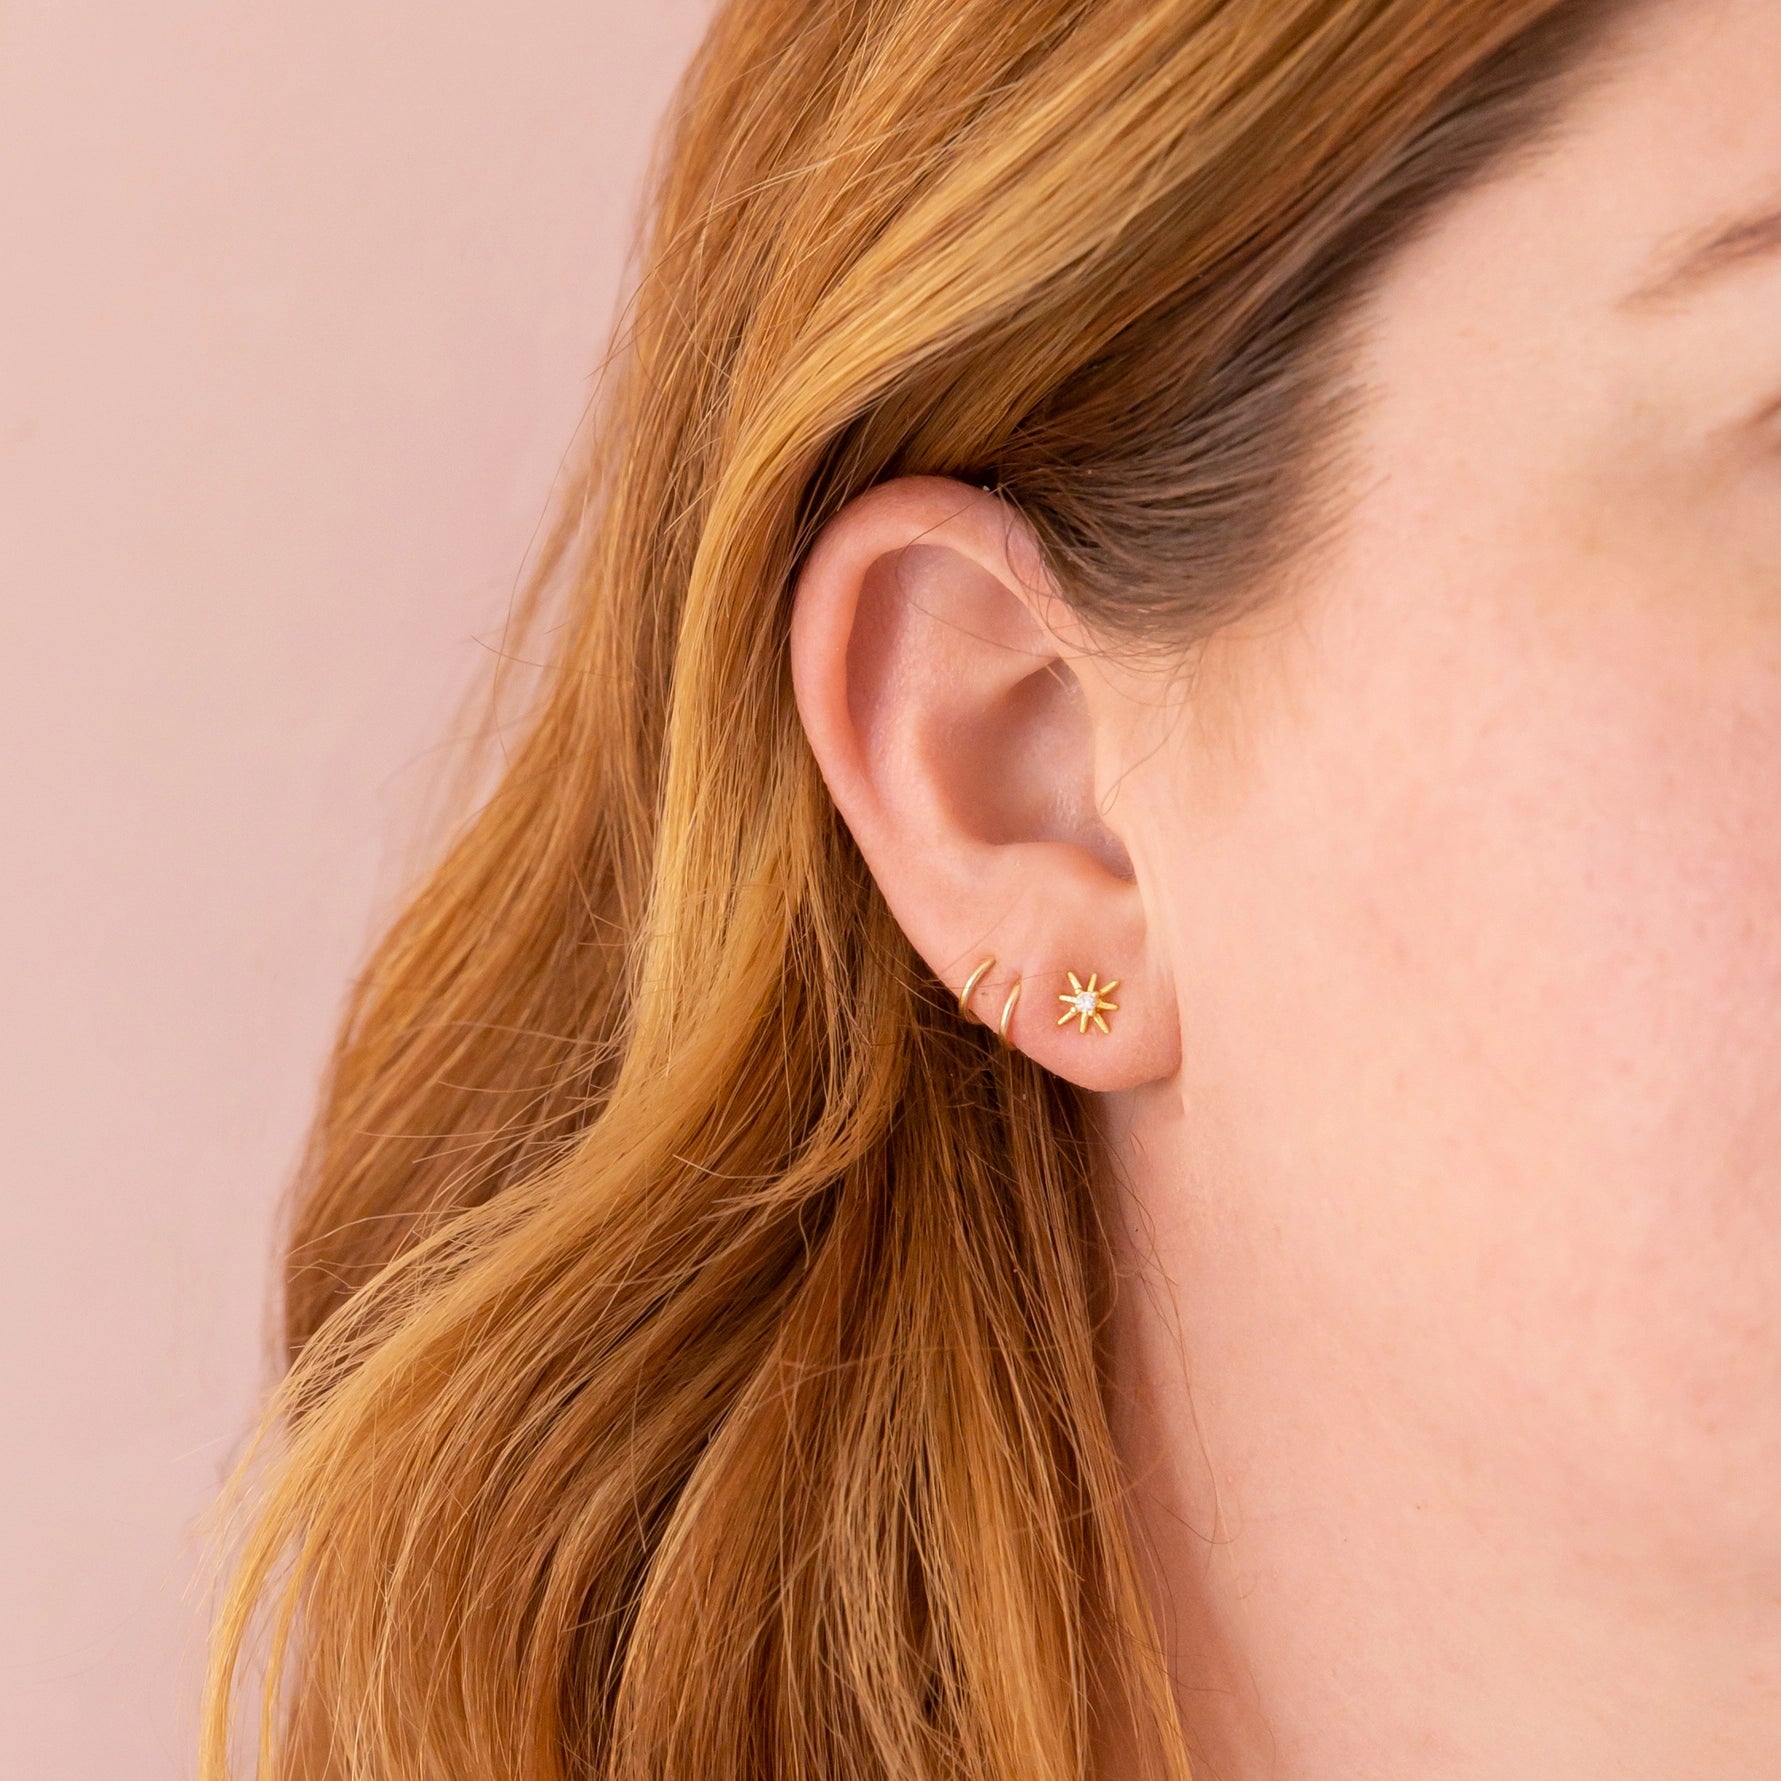 On a peachy background is a model wearing the dainty star earrings along with an existing earring stack.